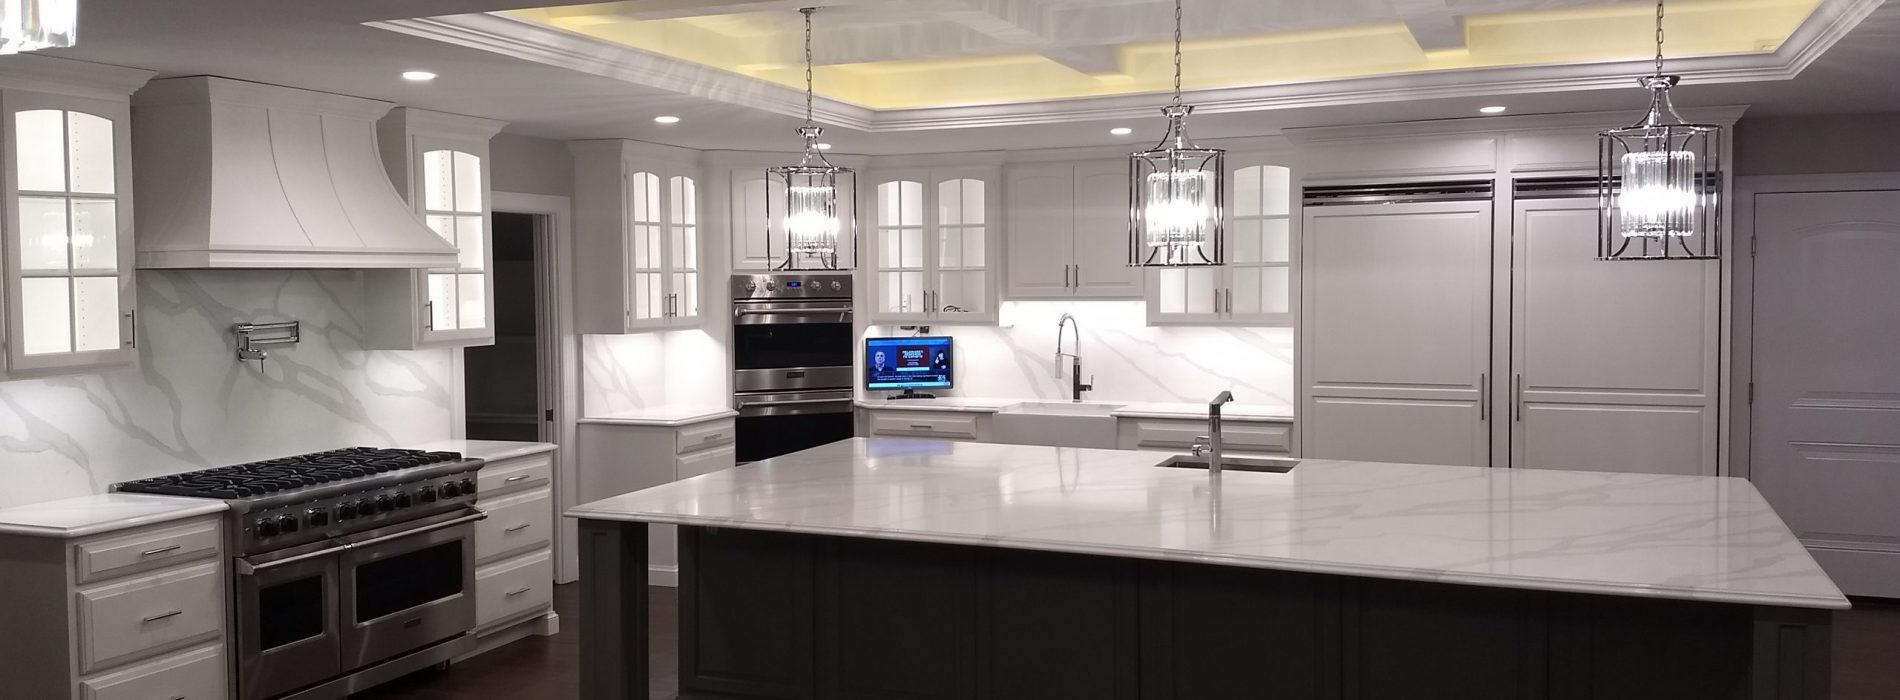 full view of a massive newly finished white granite themed kitchen, white cabinets and details, large island counter space with mini chandeliers